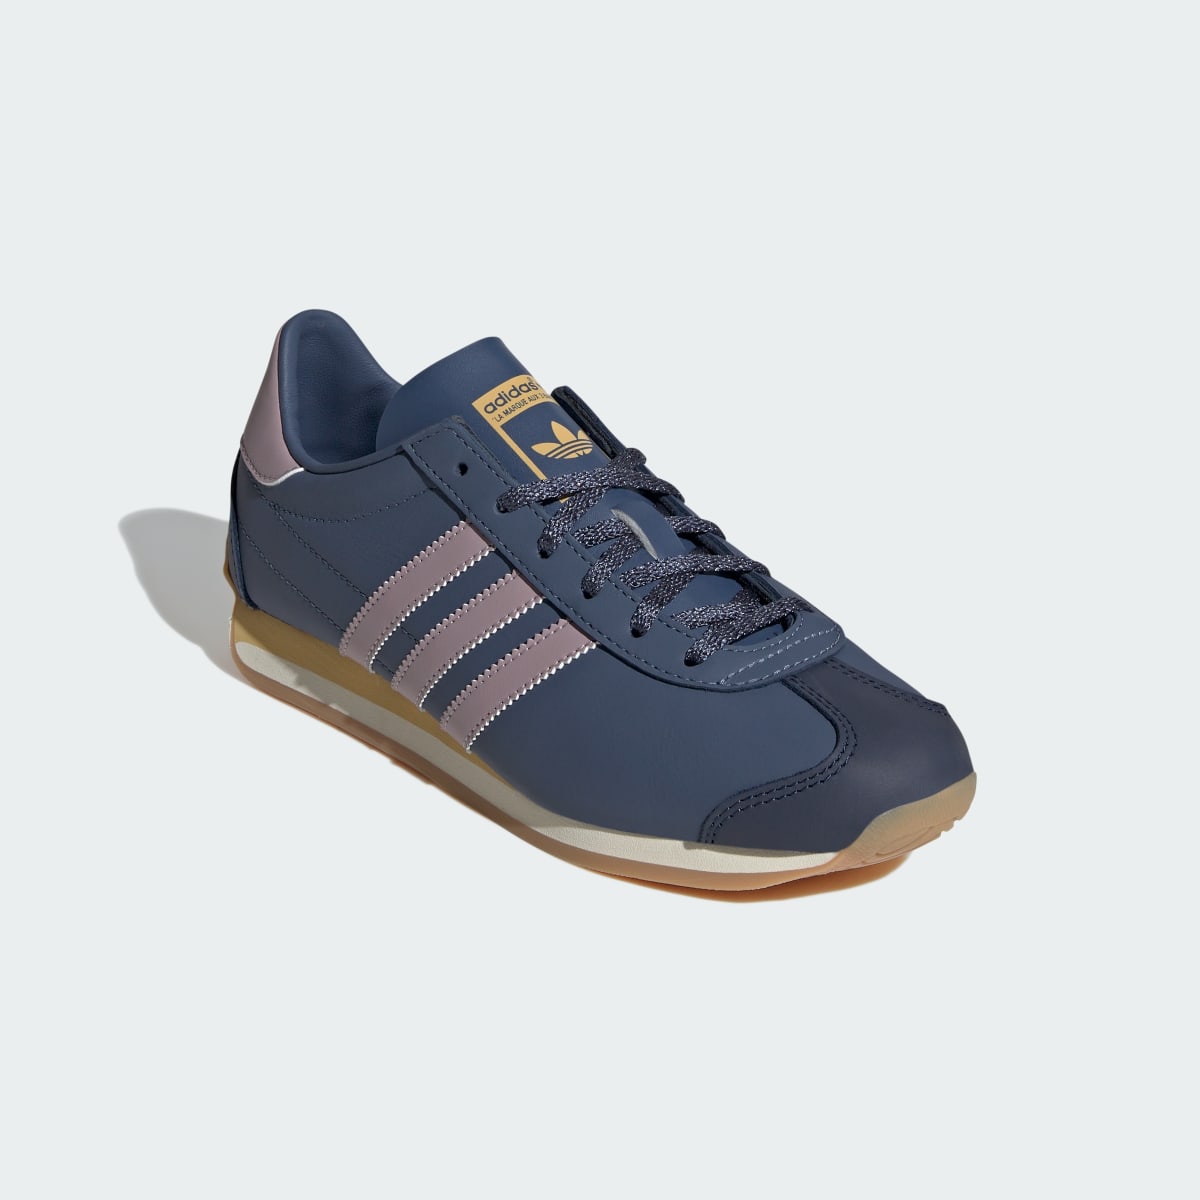 Adidas Chaussure Country OG. 5